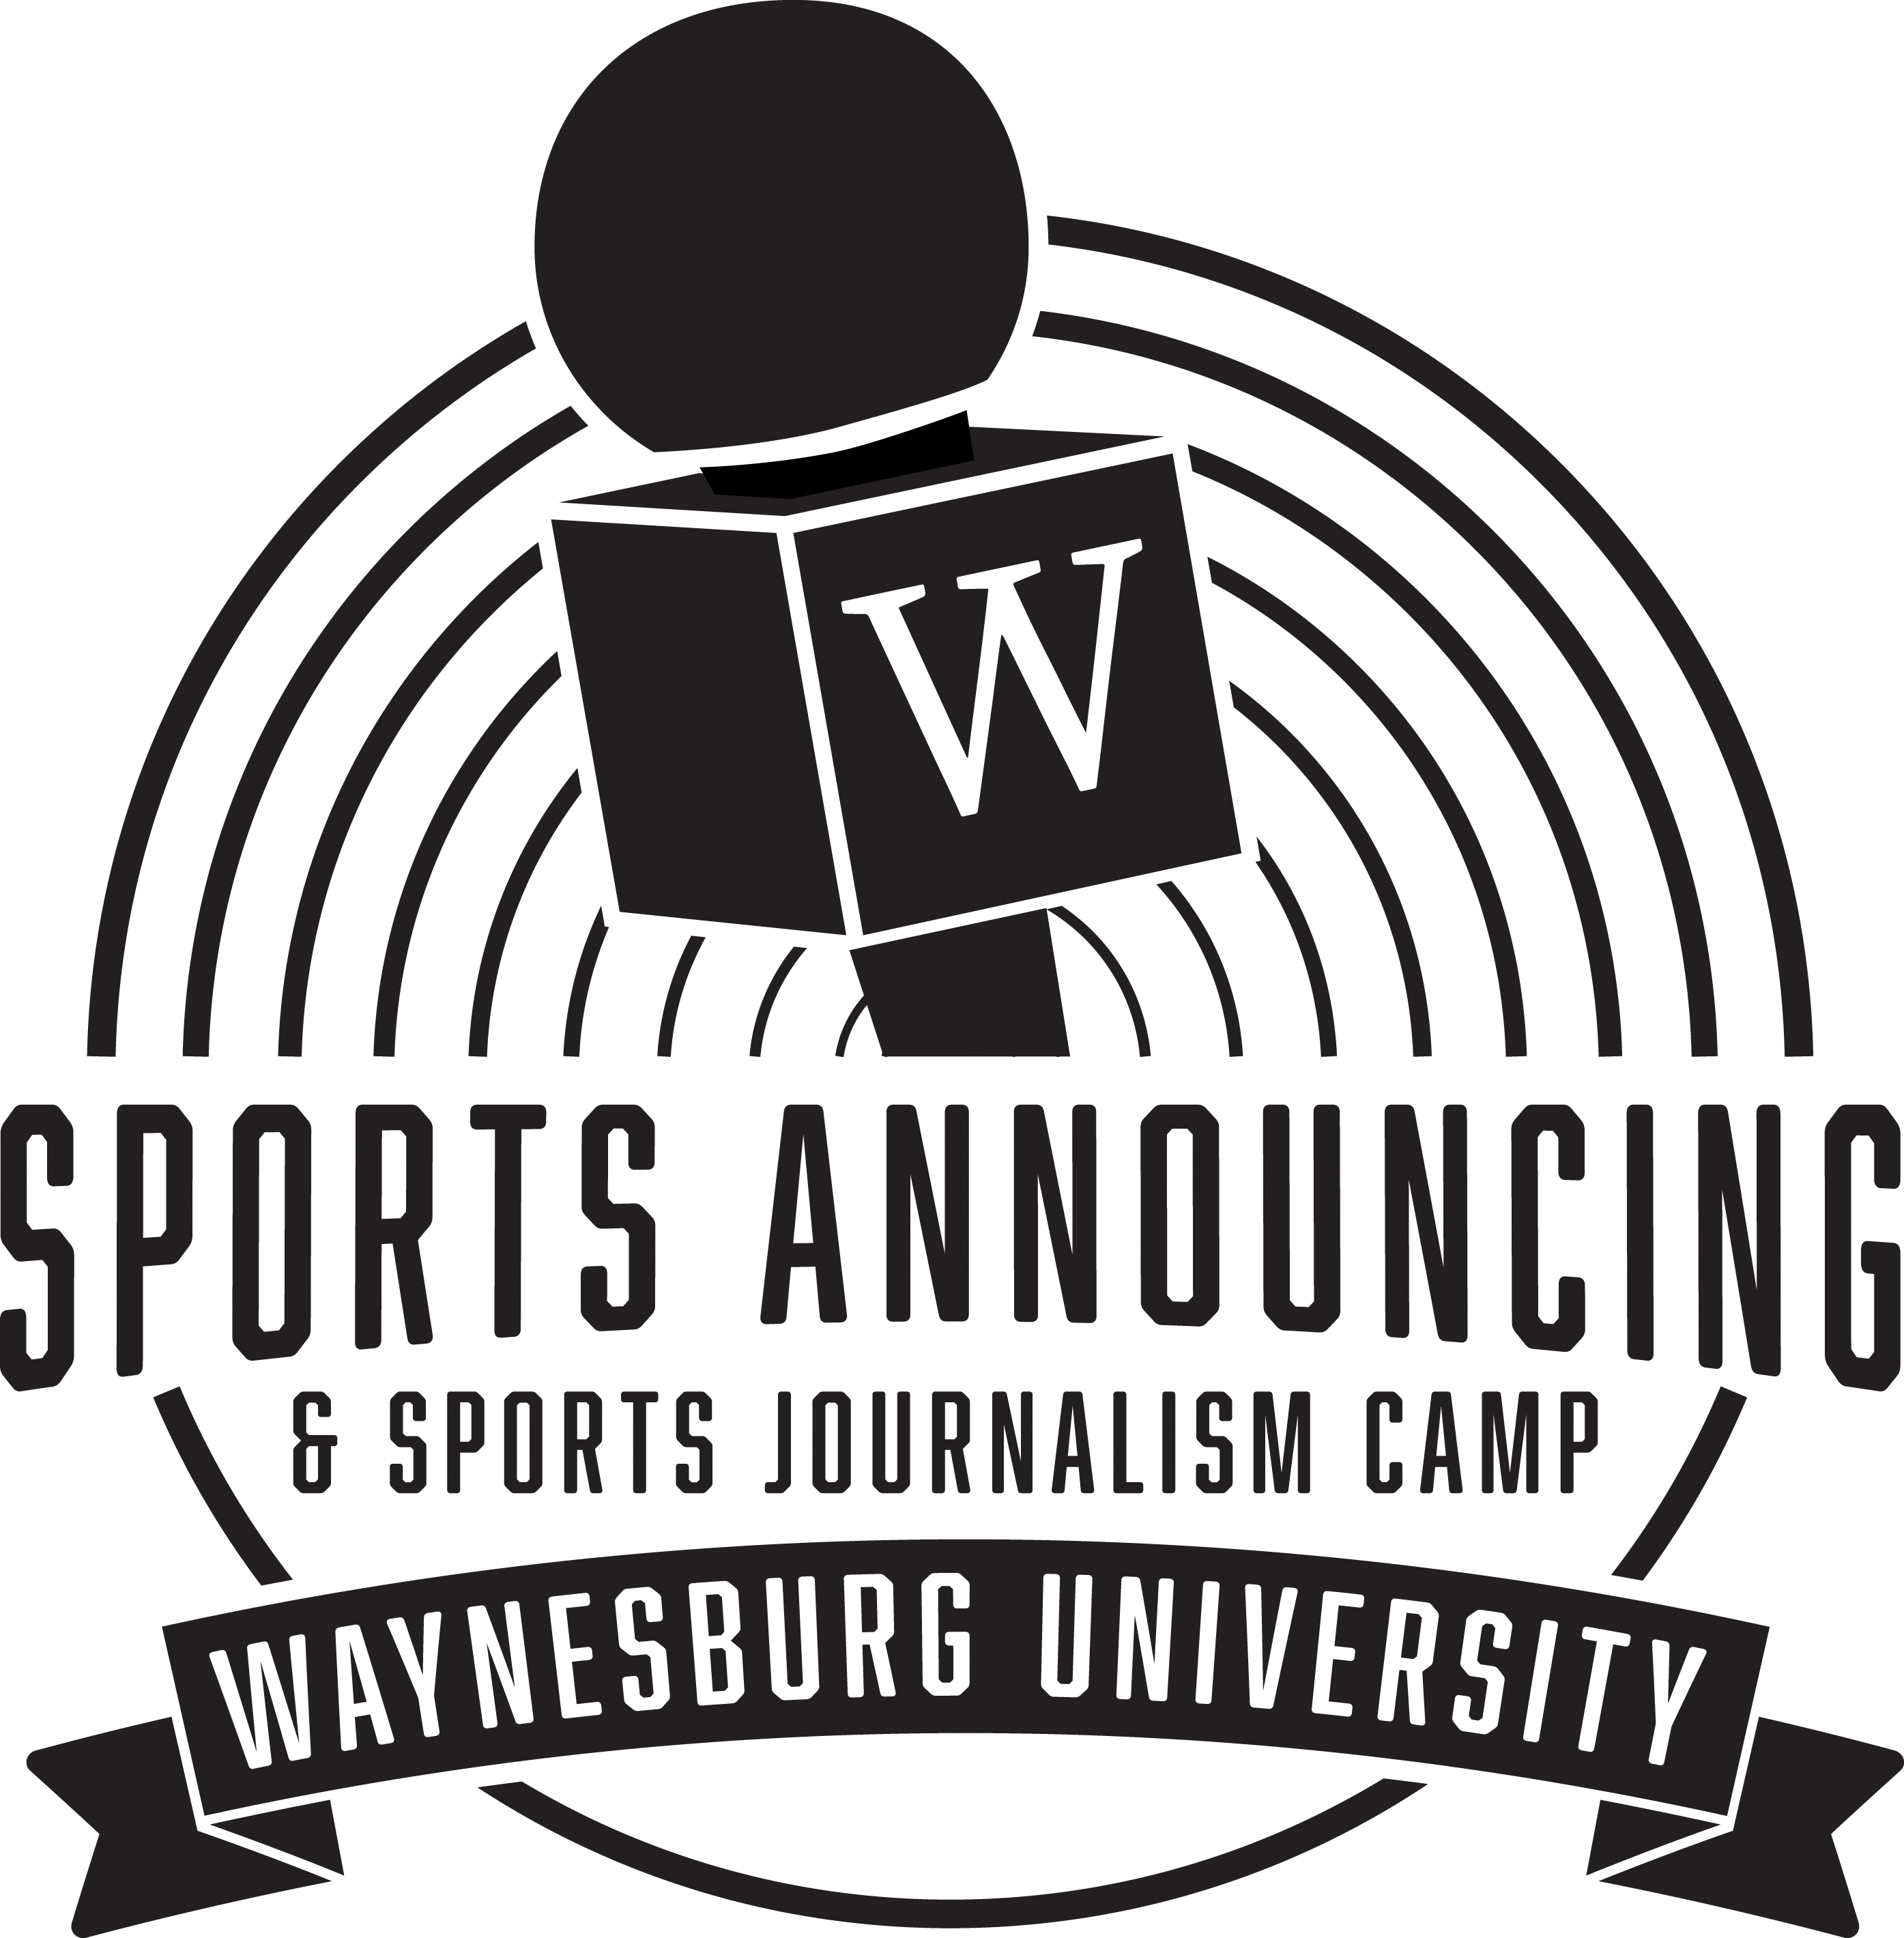 Sports Announcing & Sports Journalism Camp